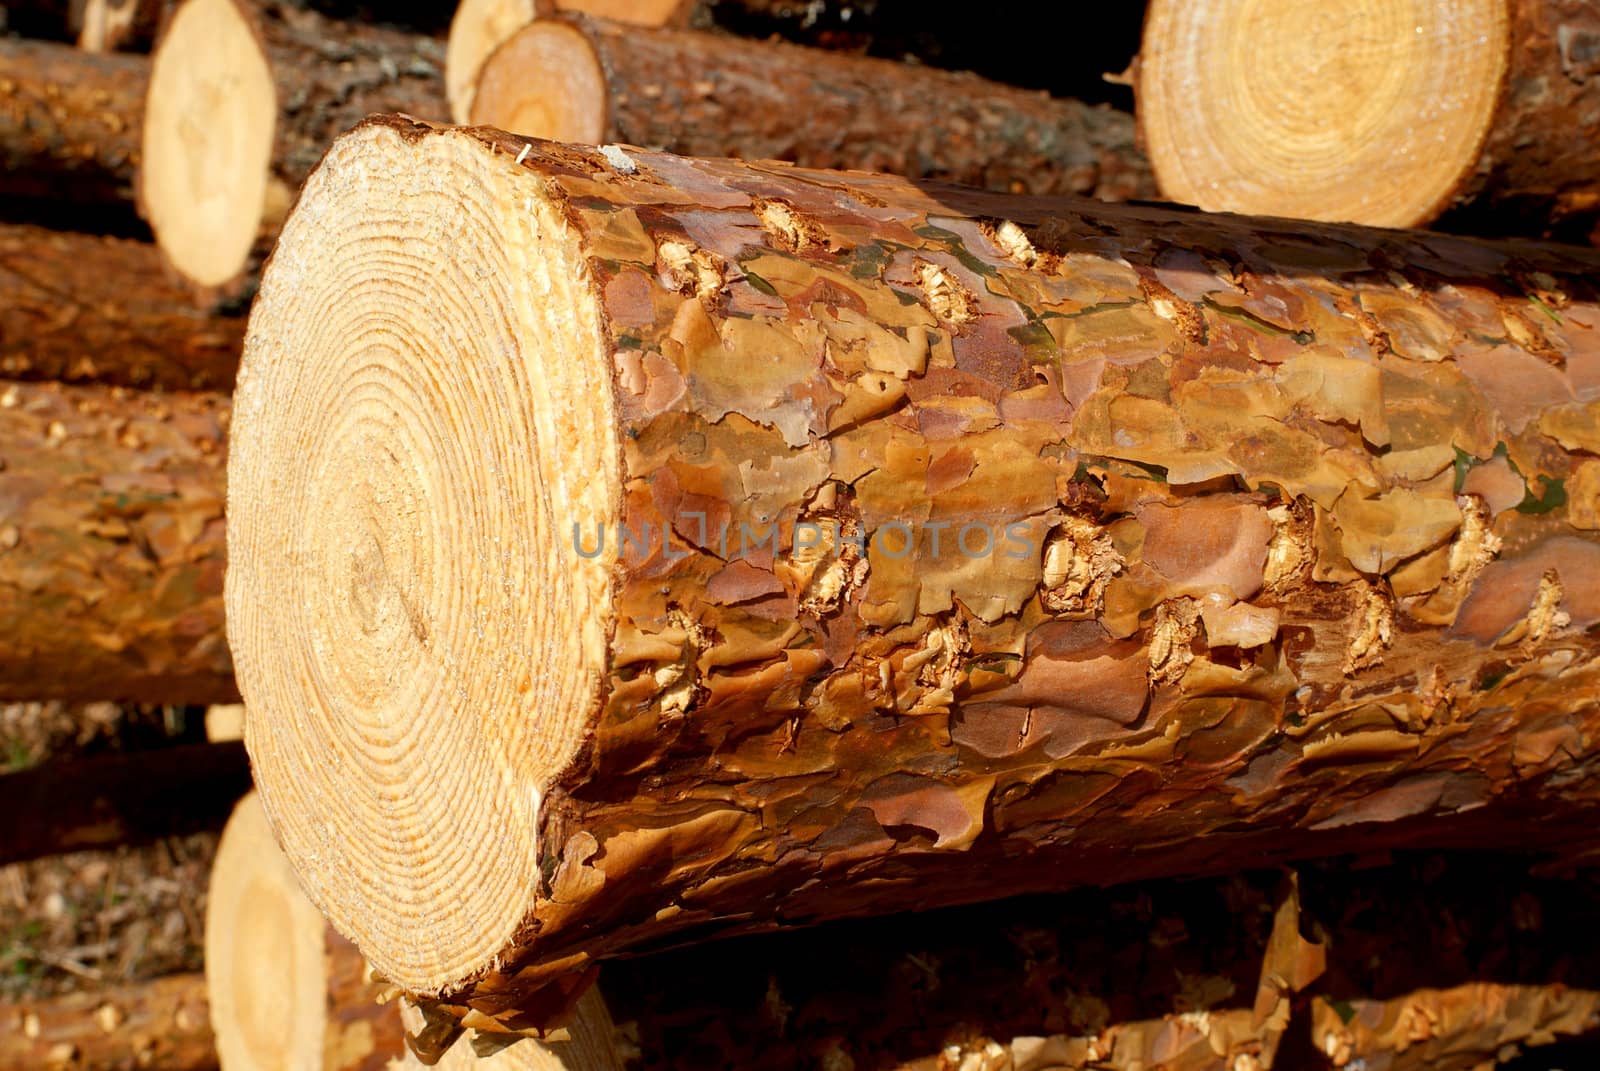 A close up view of a pine log in a stack of wooden logs. Photographed in Muurla, Finland 2010.